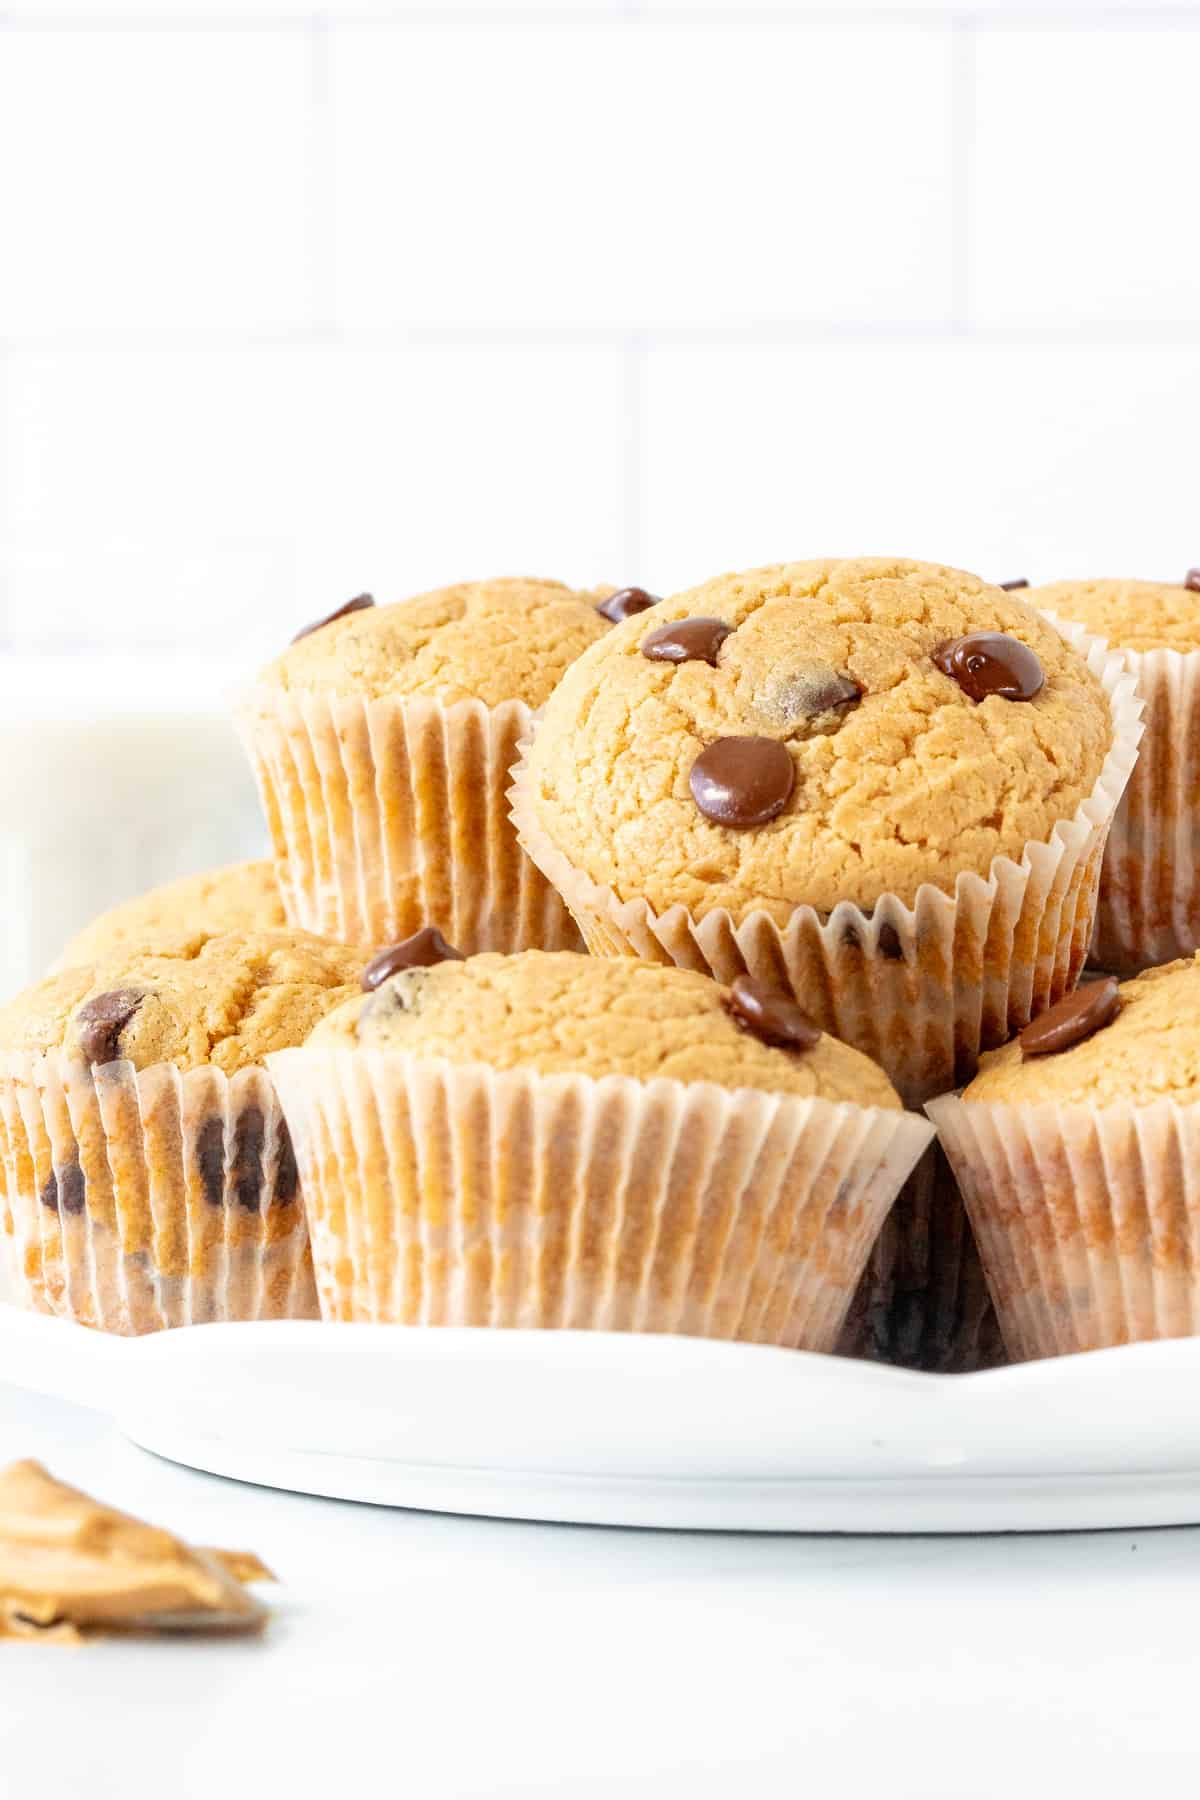 Plate of peanut butter muffins